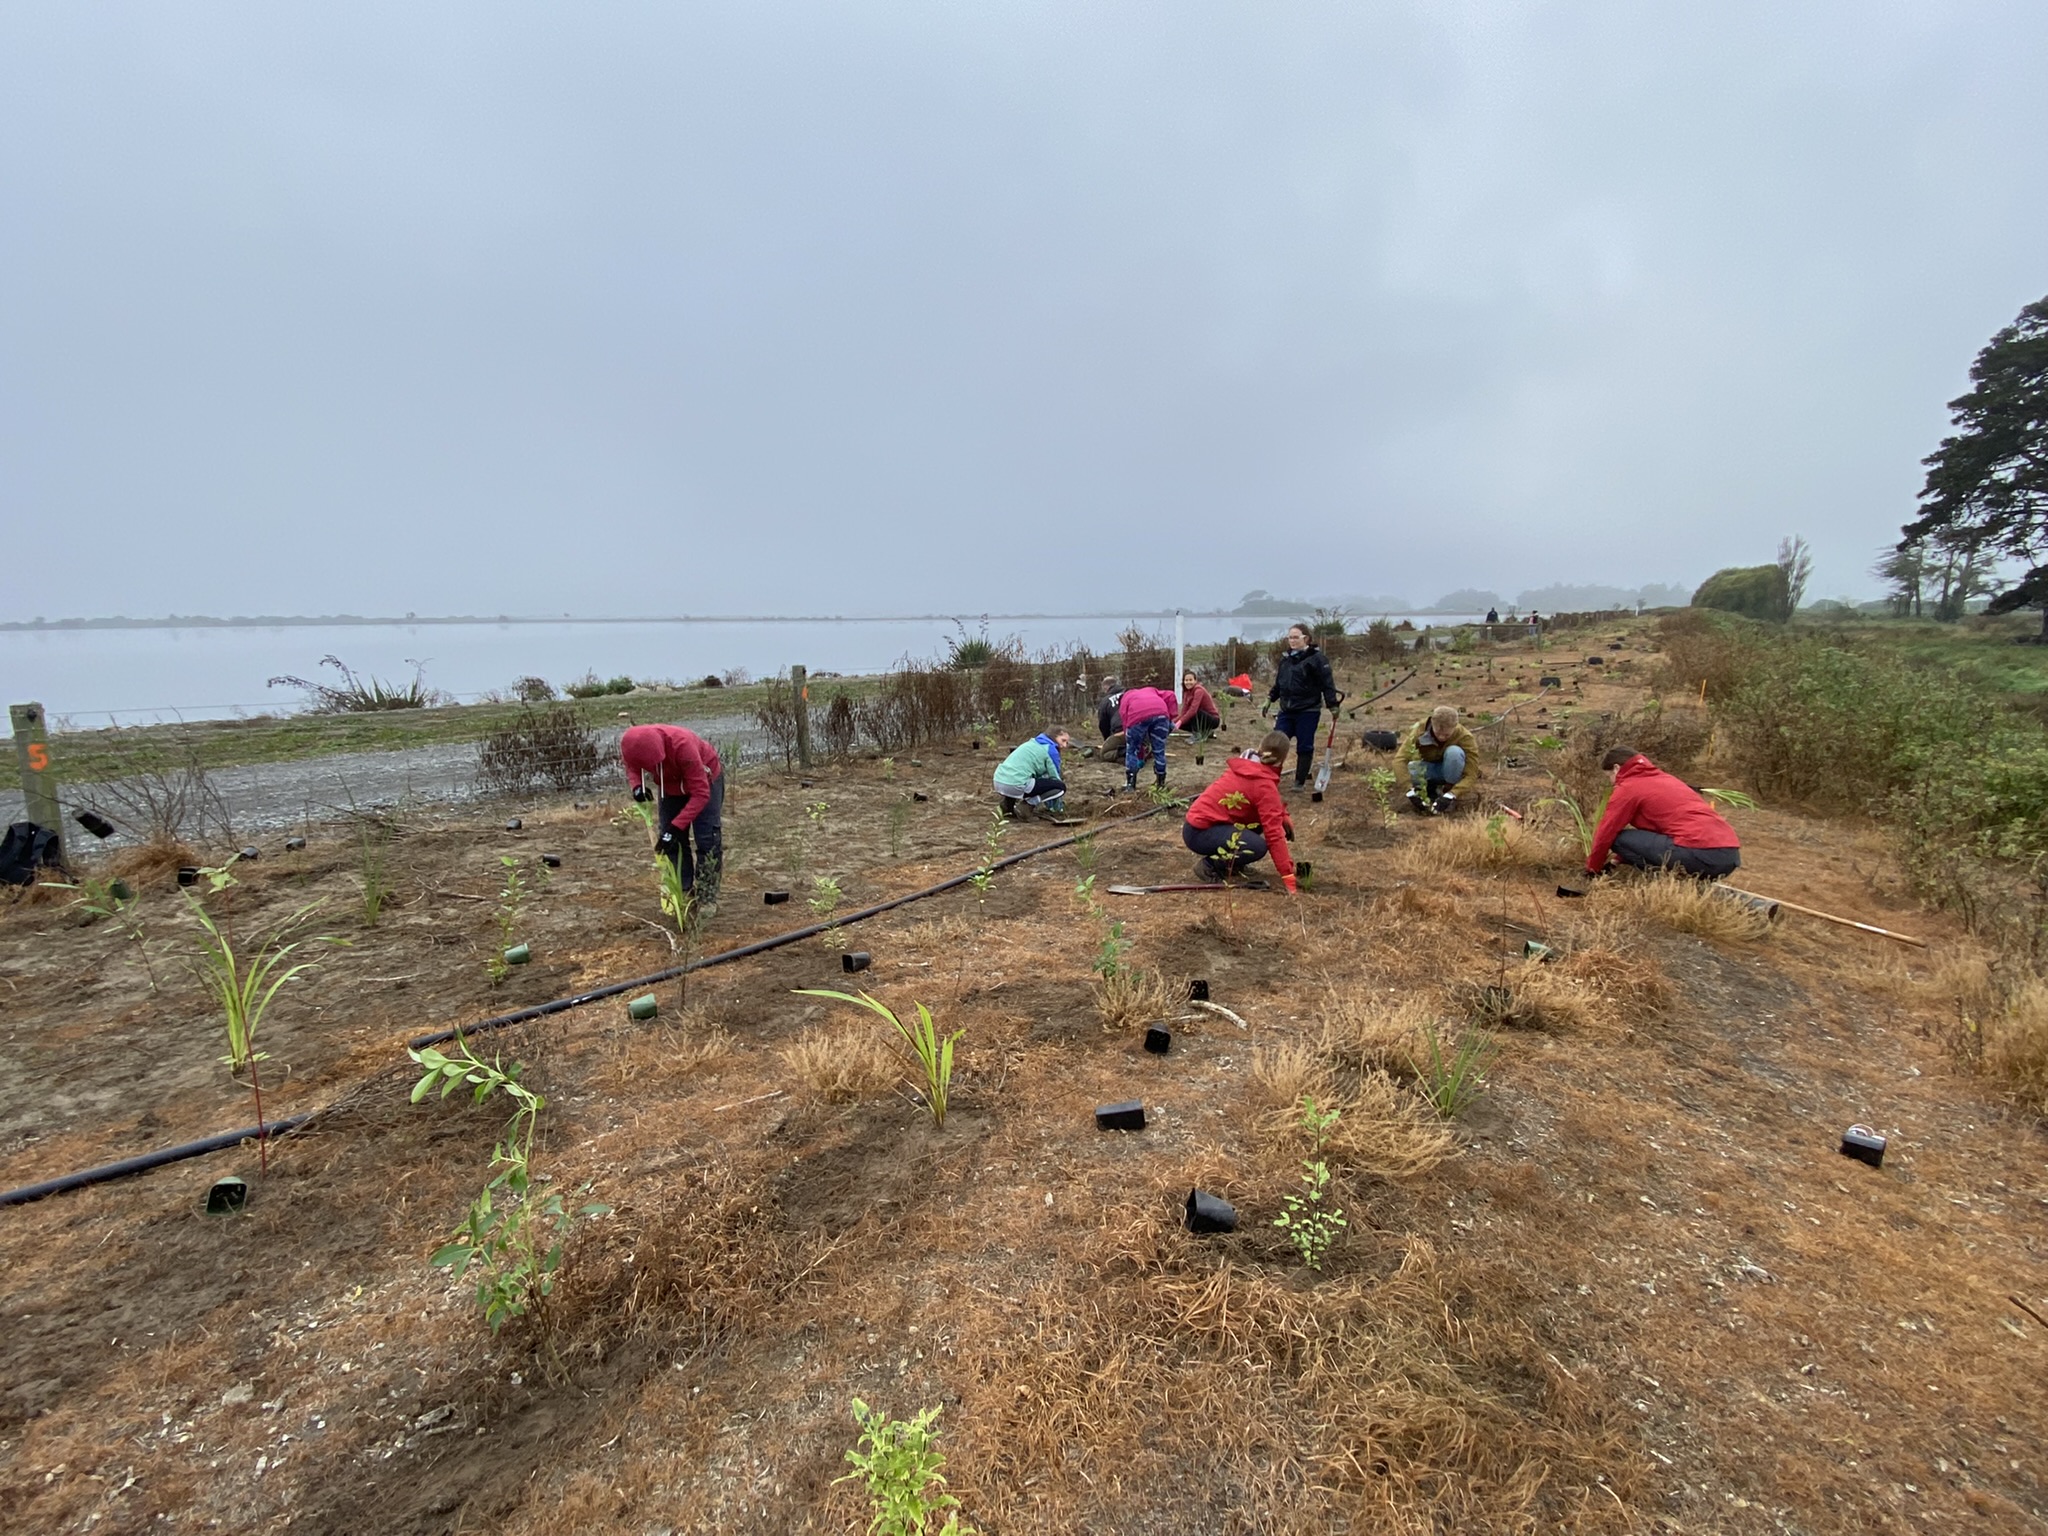 Under a cloudy sky, nine people are planting native vegetation in an empty area near the road and a body of water